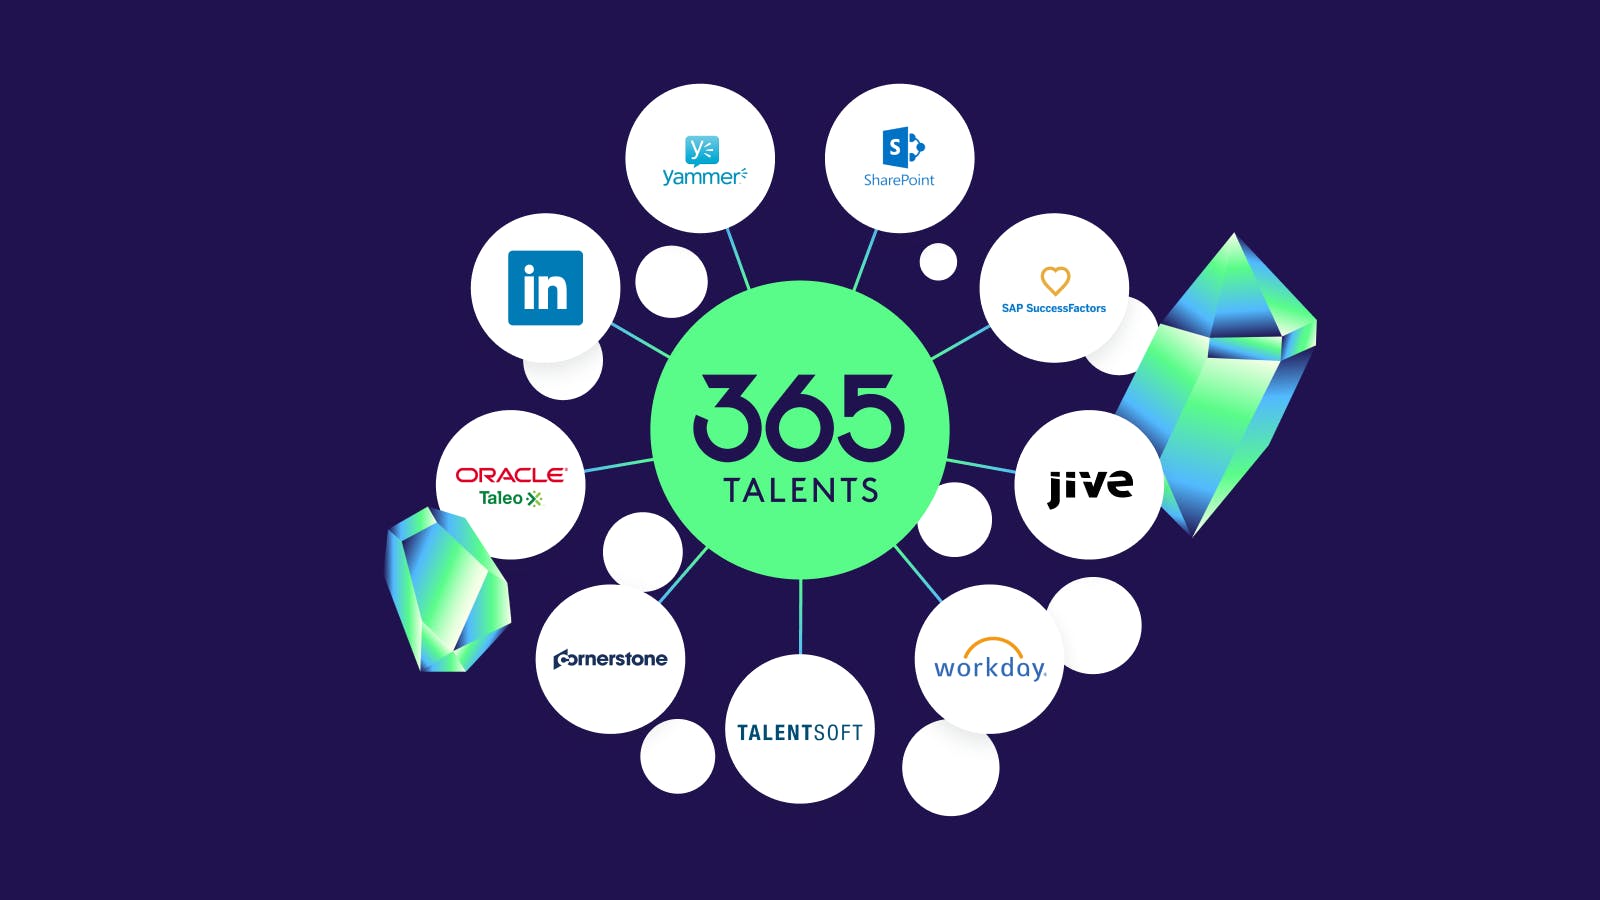 Connect 365Talents with over 50 applications